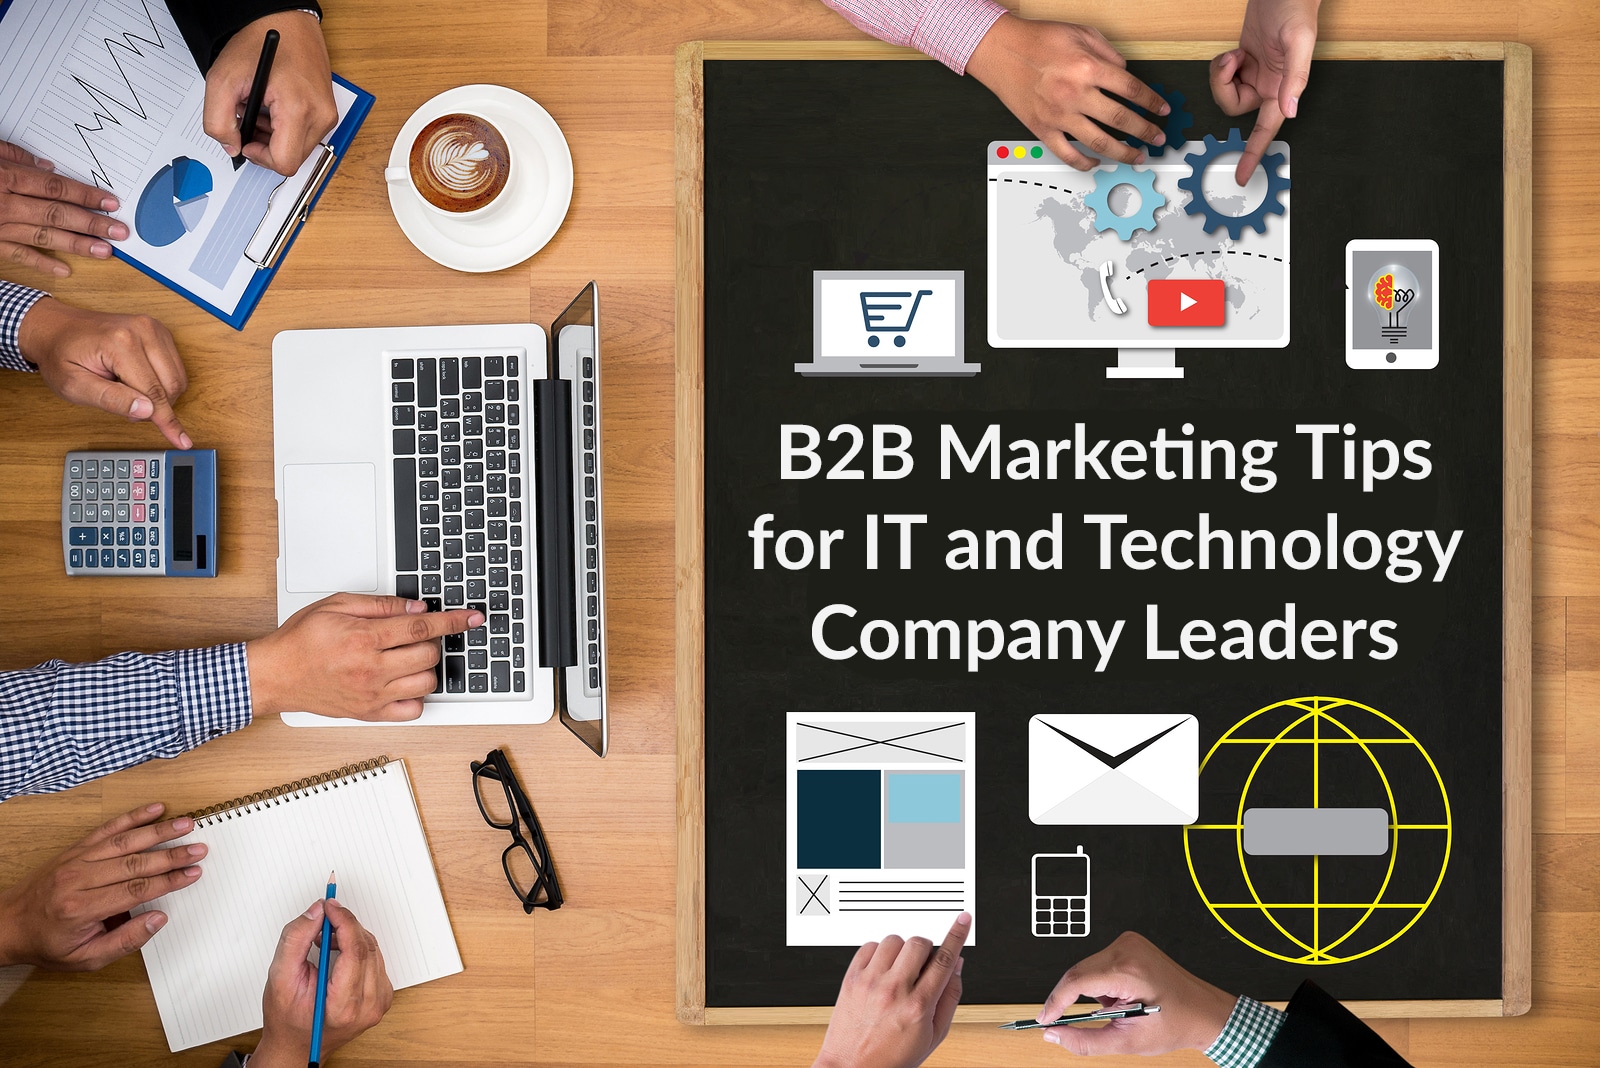 B2B Marketing Tips for IT and Technology Company Leaders